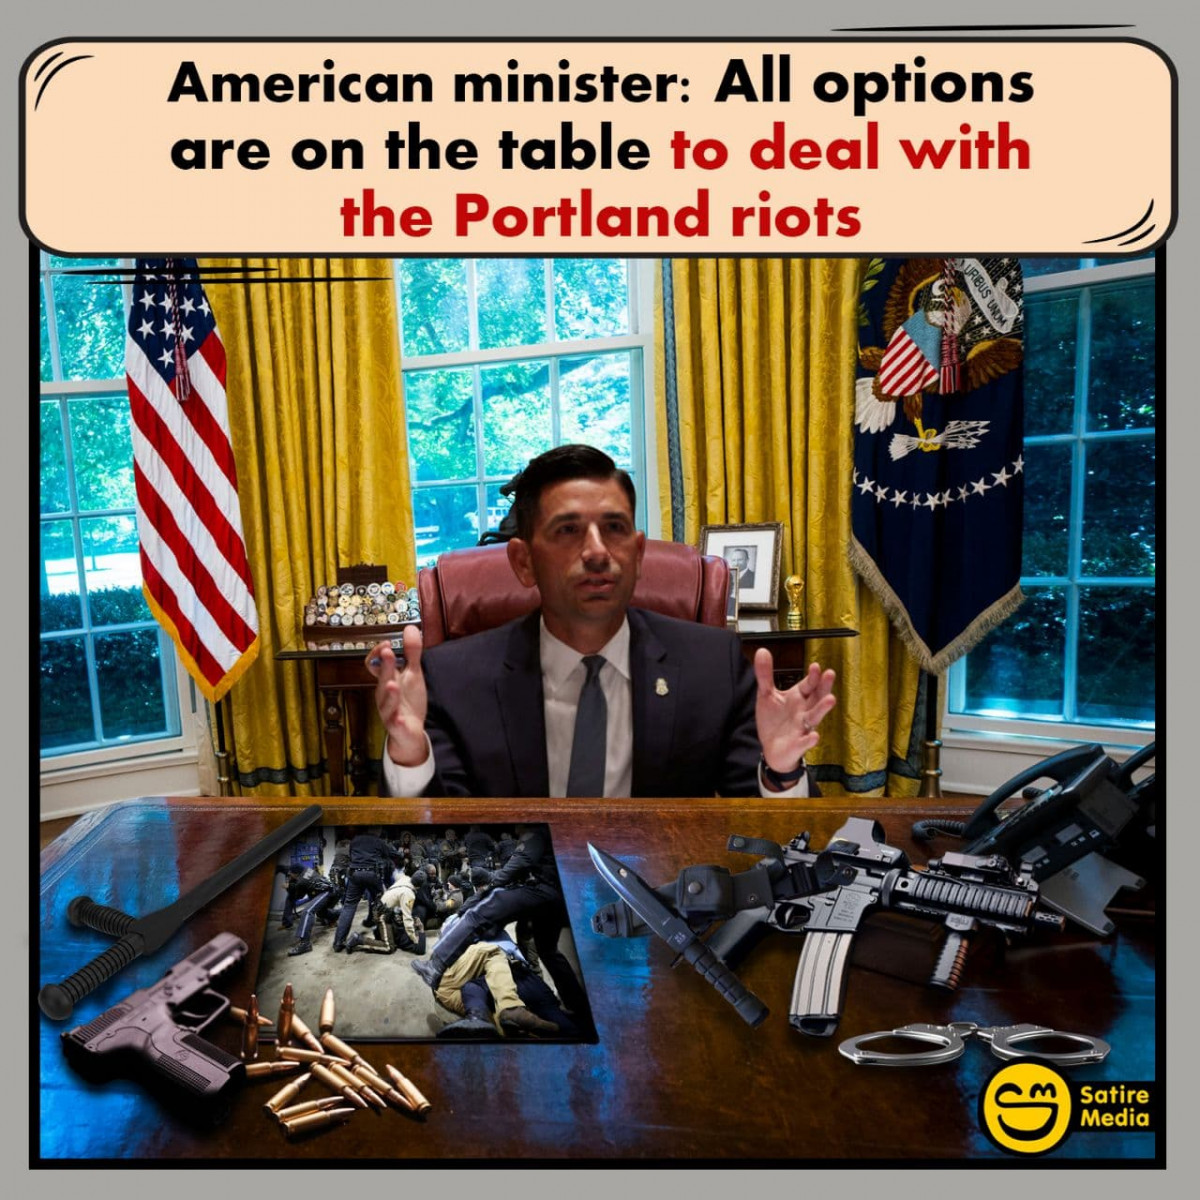 American minister: All options are on the table to deal with the Portland riots